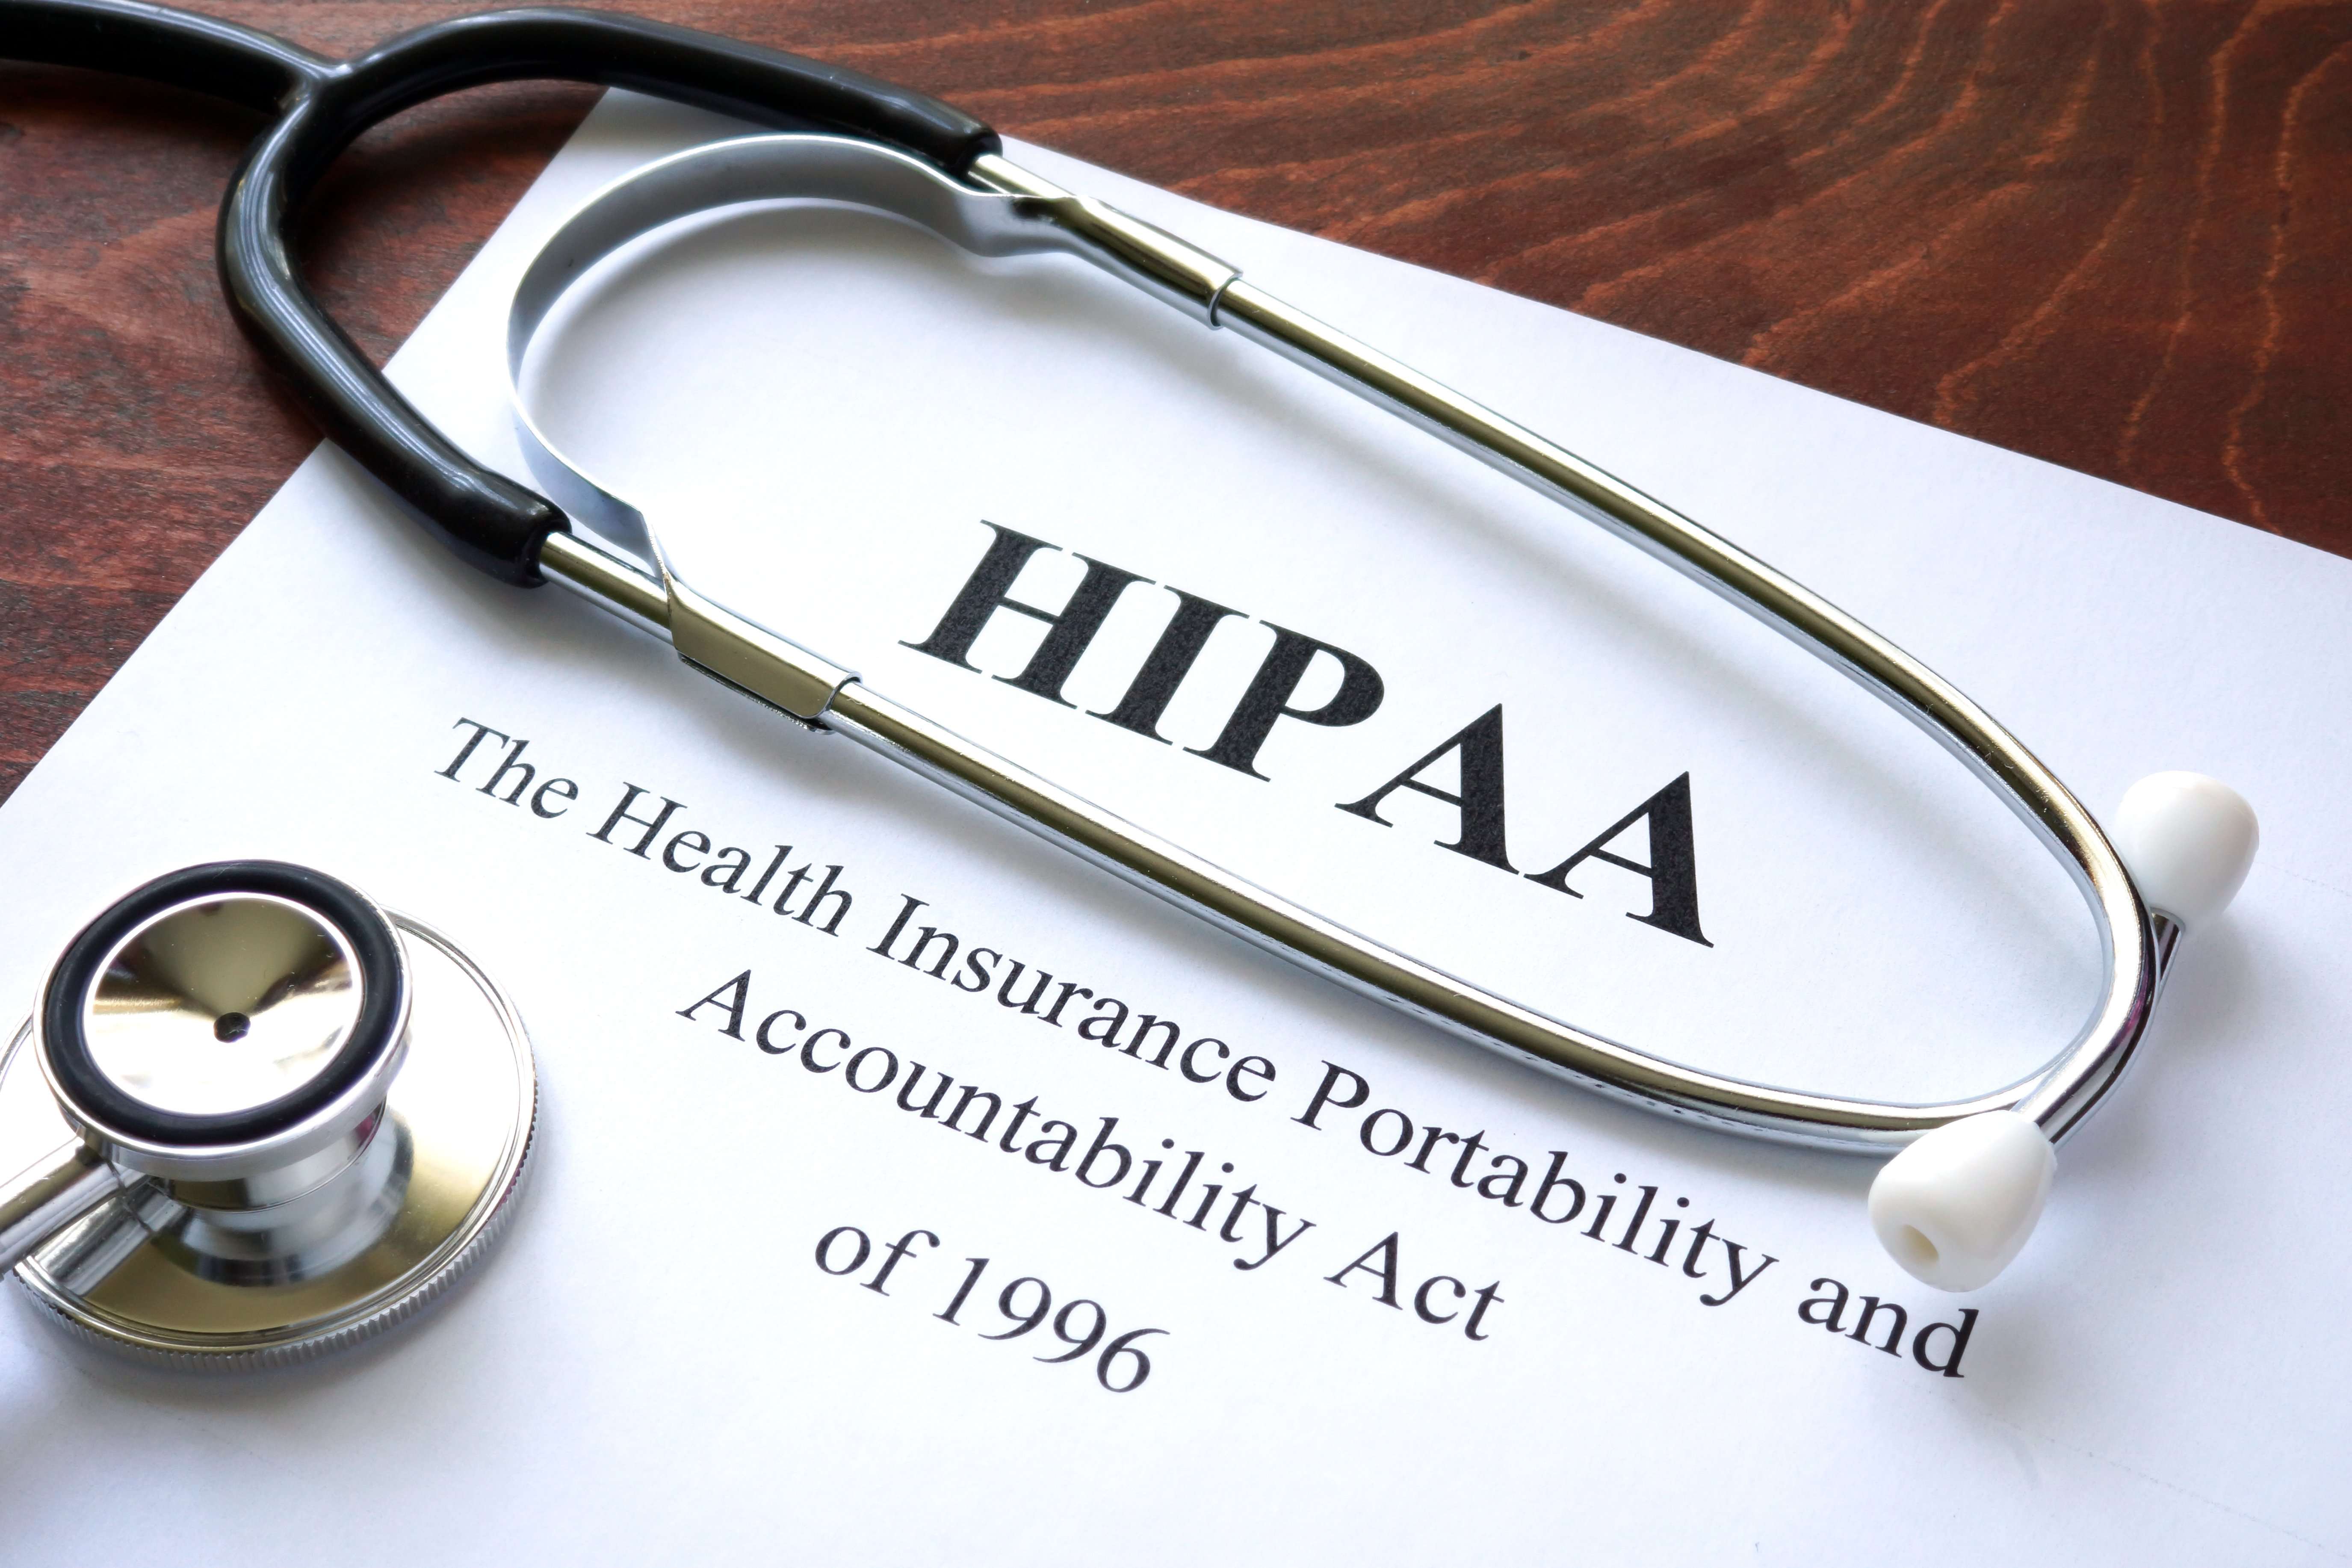 Texas Health and Human Services Commission hit with $1.6M fine for HIPAA violations